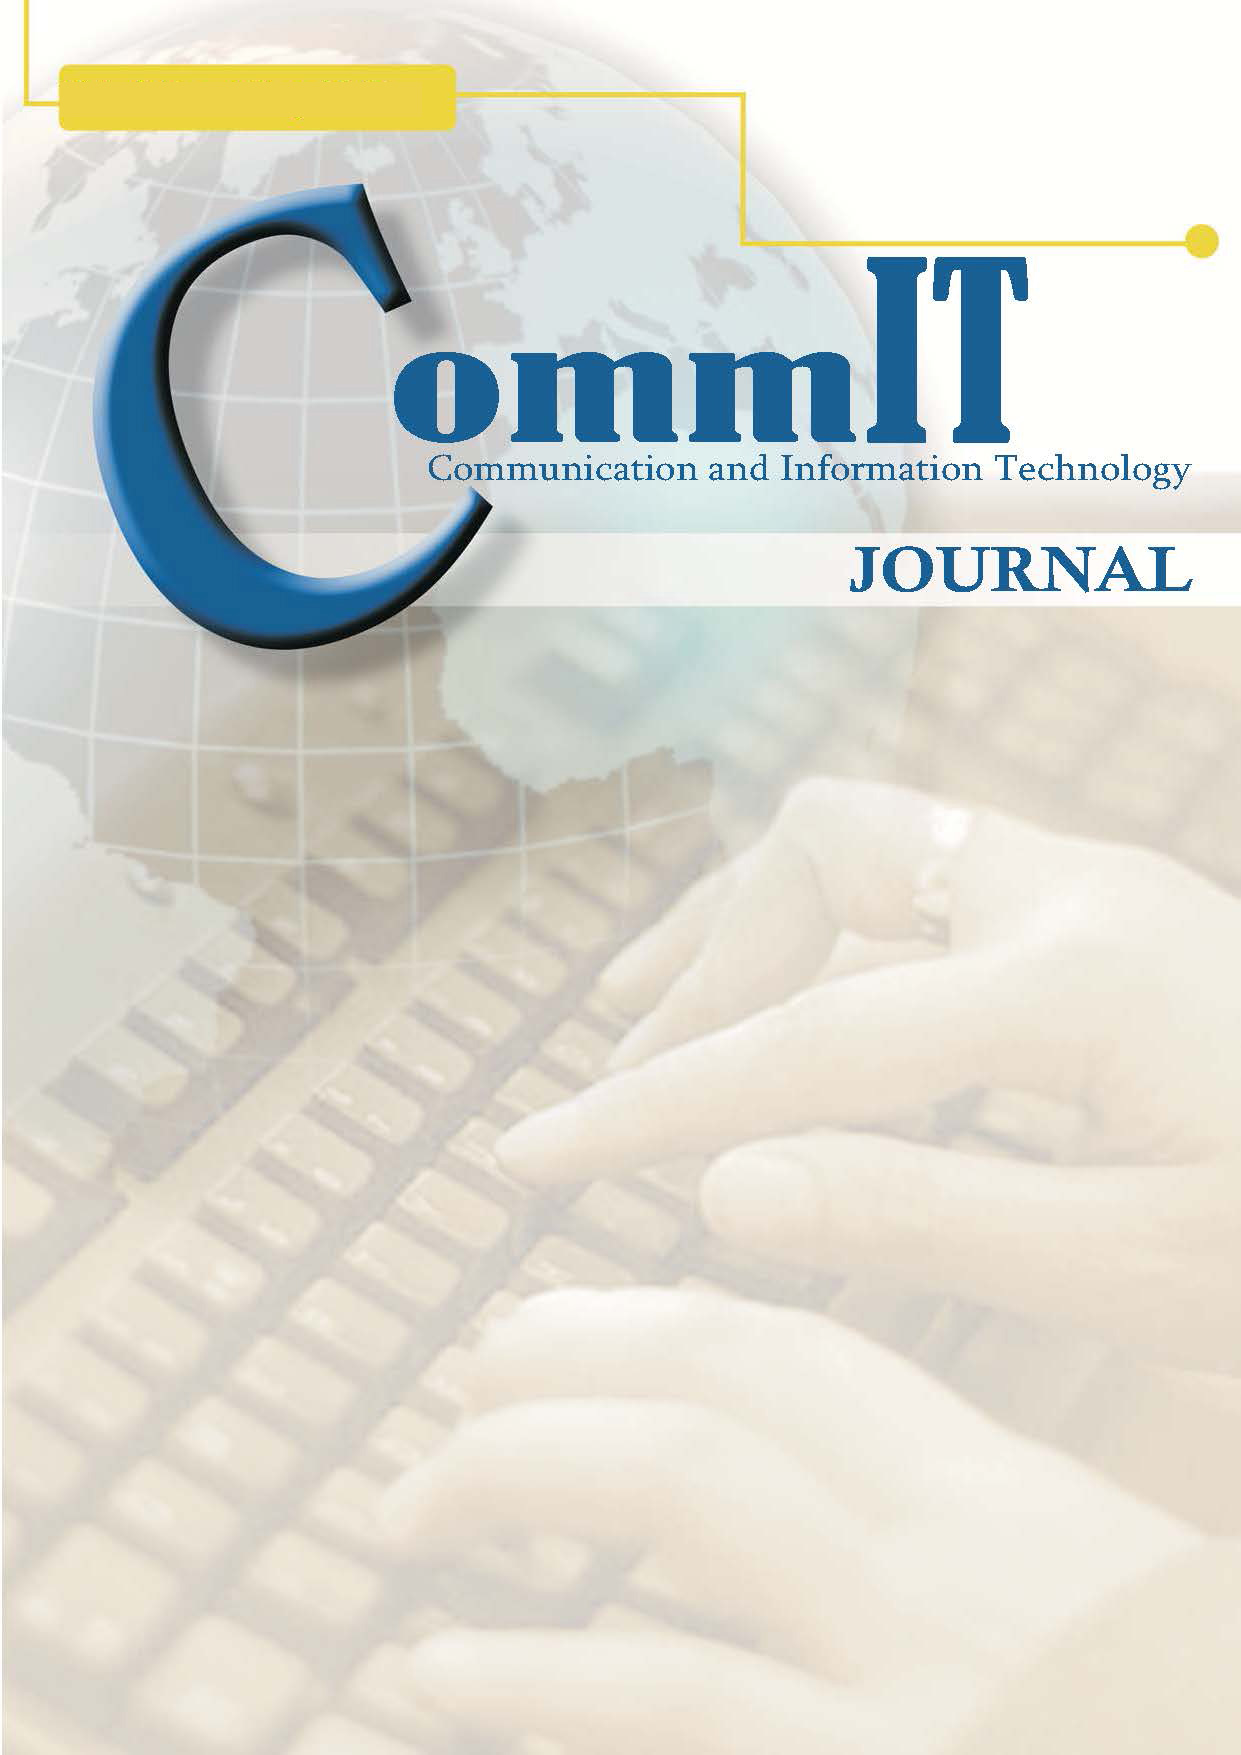 CommIT (Communication and Information Technology) Journal